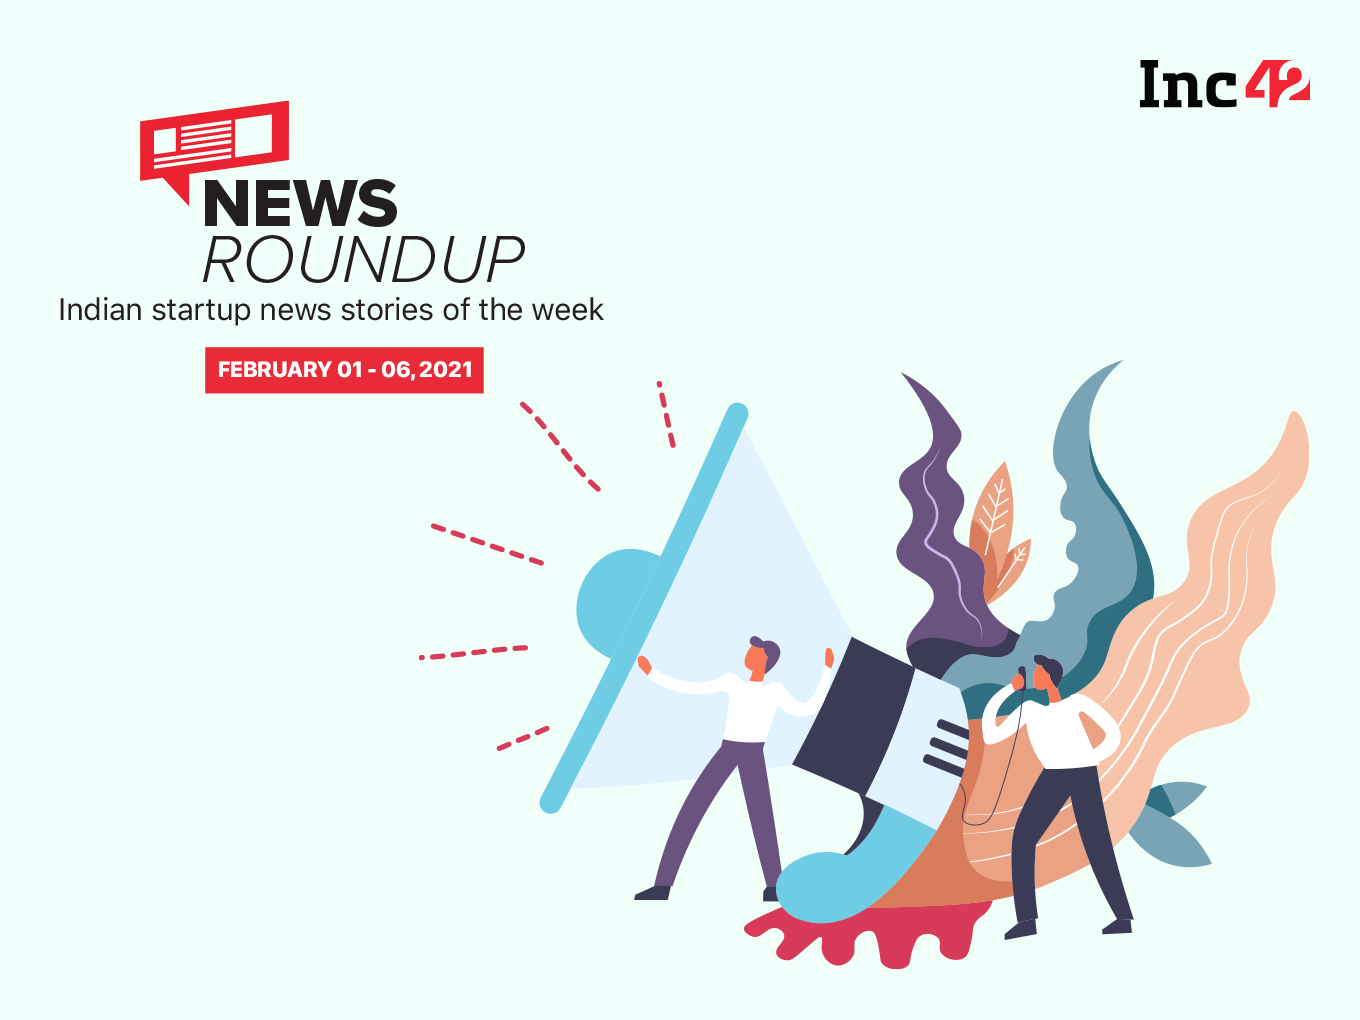 News Roundup: WhatsApp, Twitter Tackle PILs, Scrutiny In India, & More